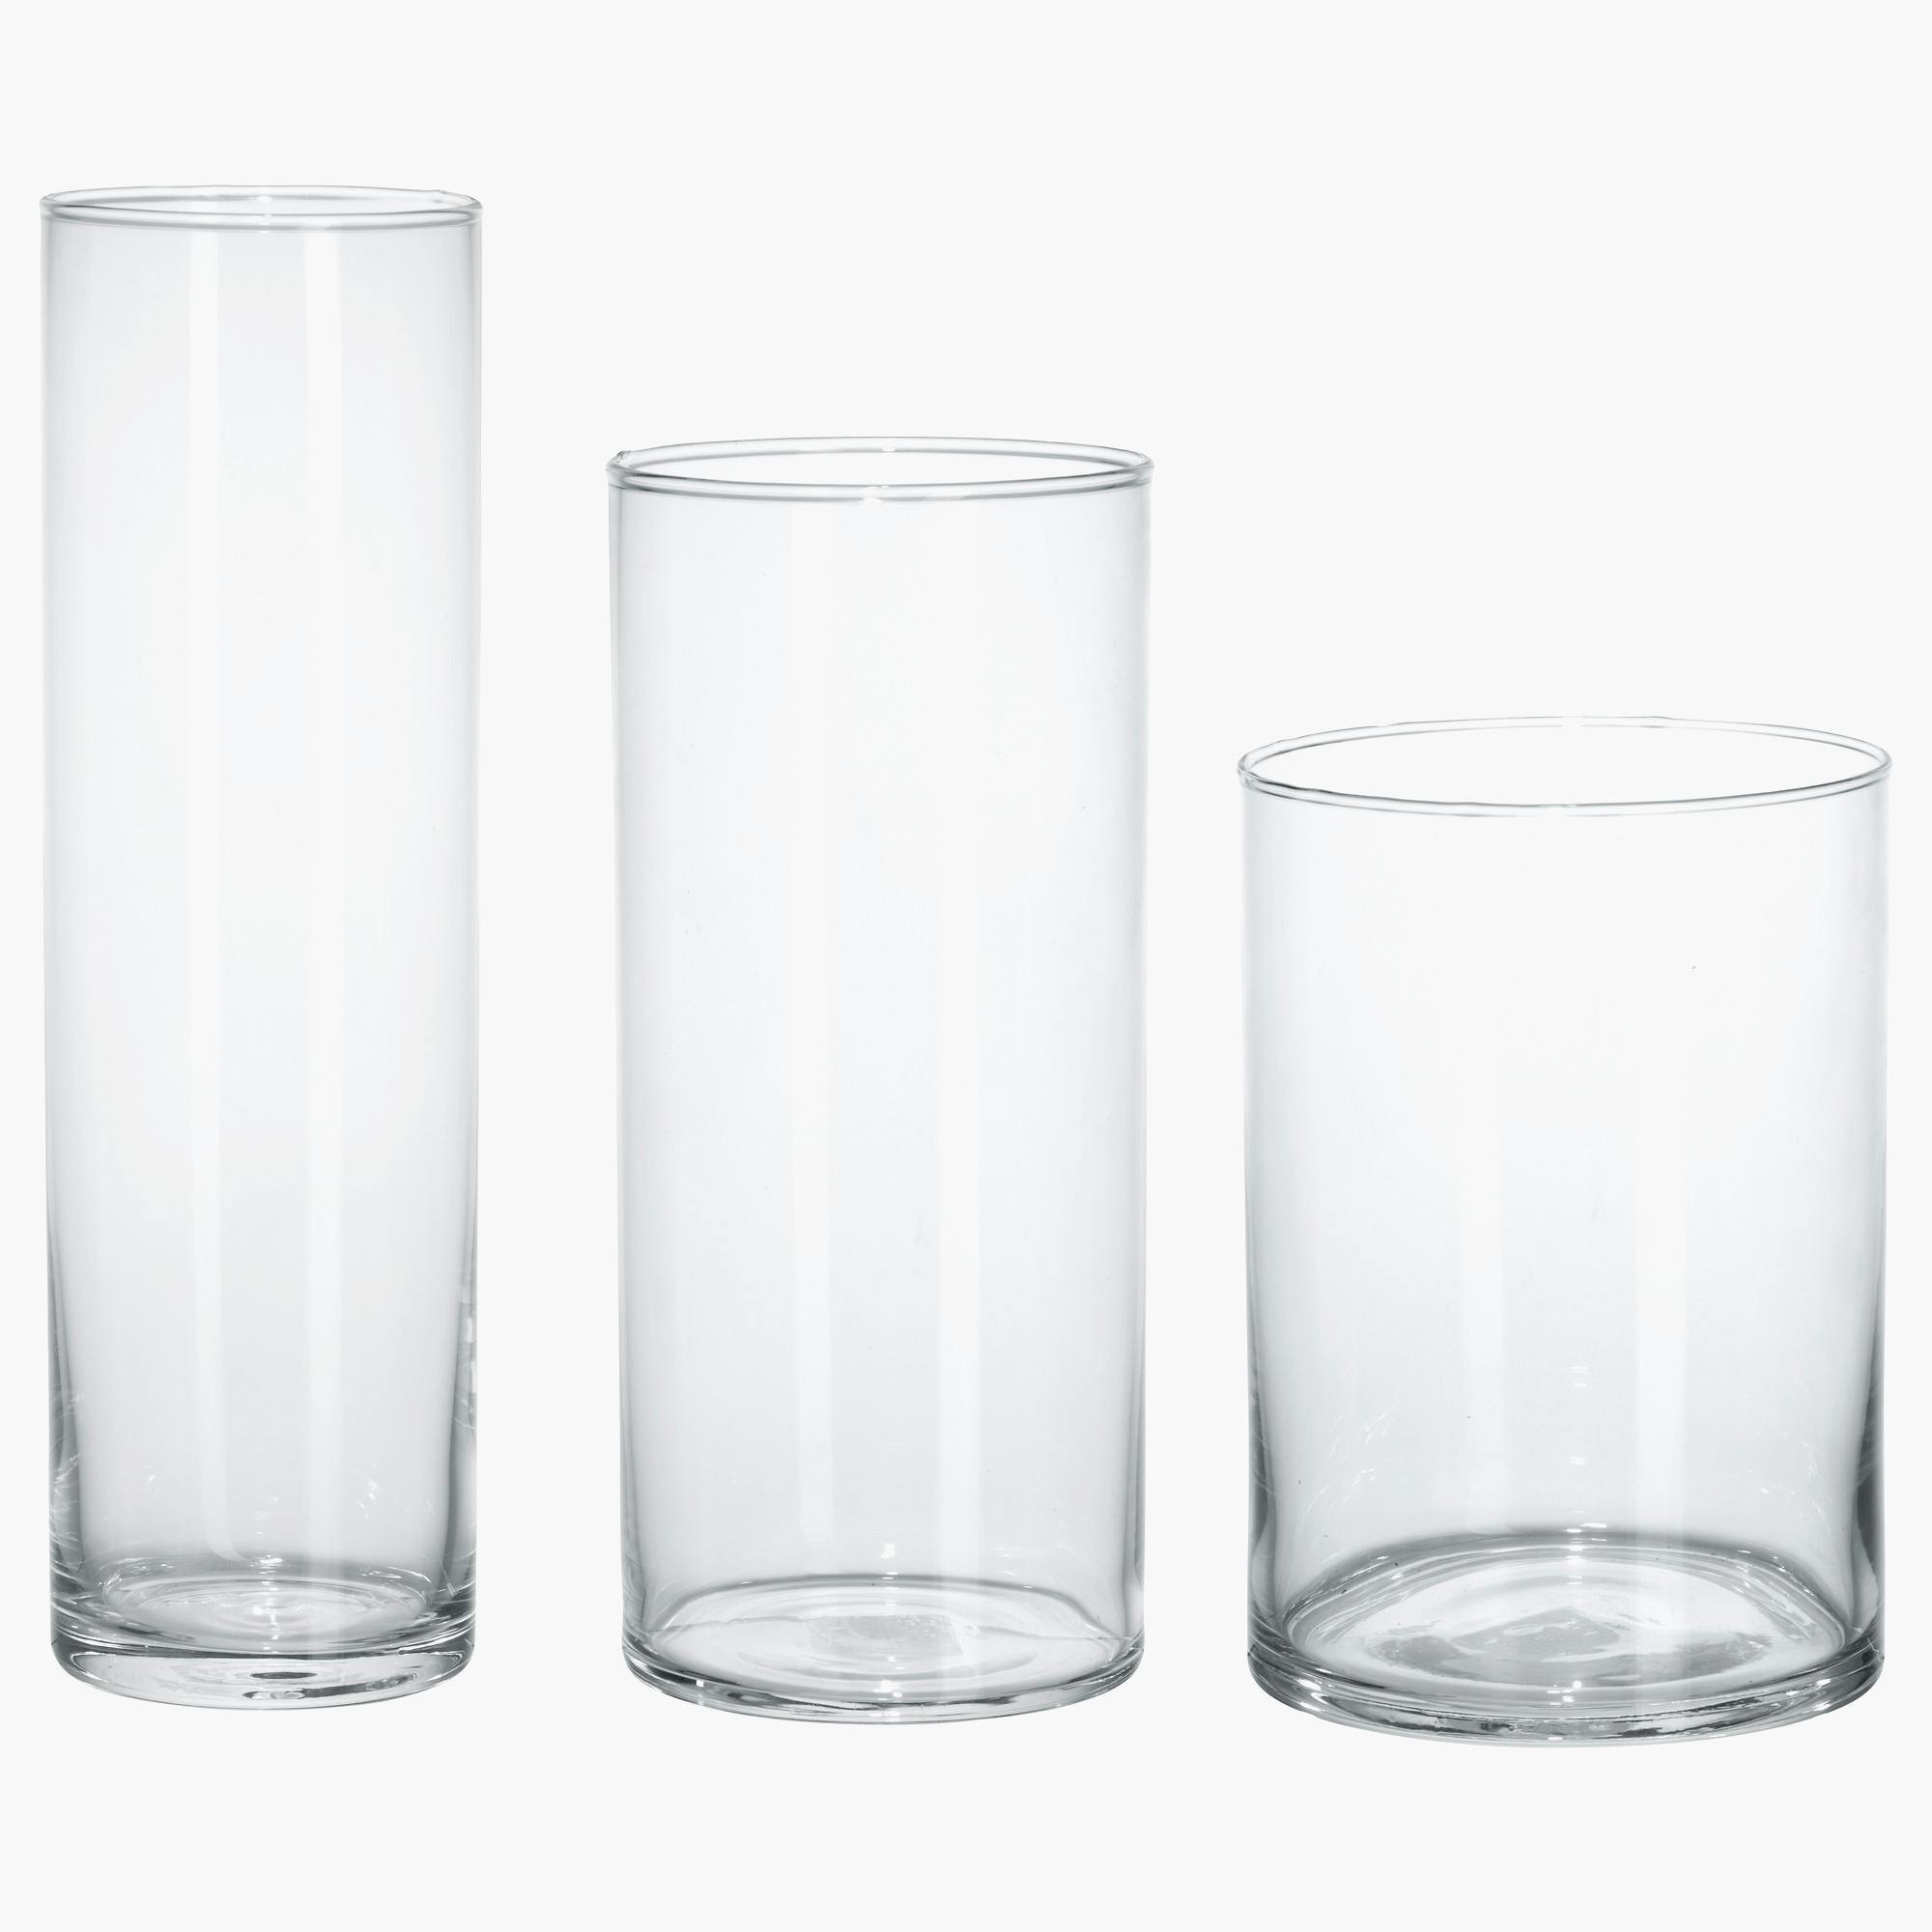 18 Stunning Ikea Glass Flower Vases 2024 free download ikea glass flower vases of ikea flower vase pics 27 glass rack for bar quality new design ikea pertaining to ikea flower vase pics 27 glass rack for bar quality new design ikea glass display